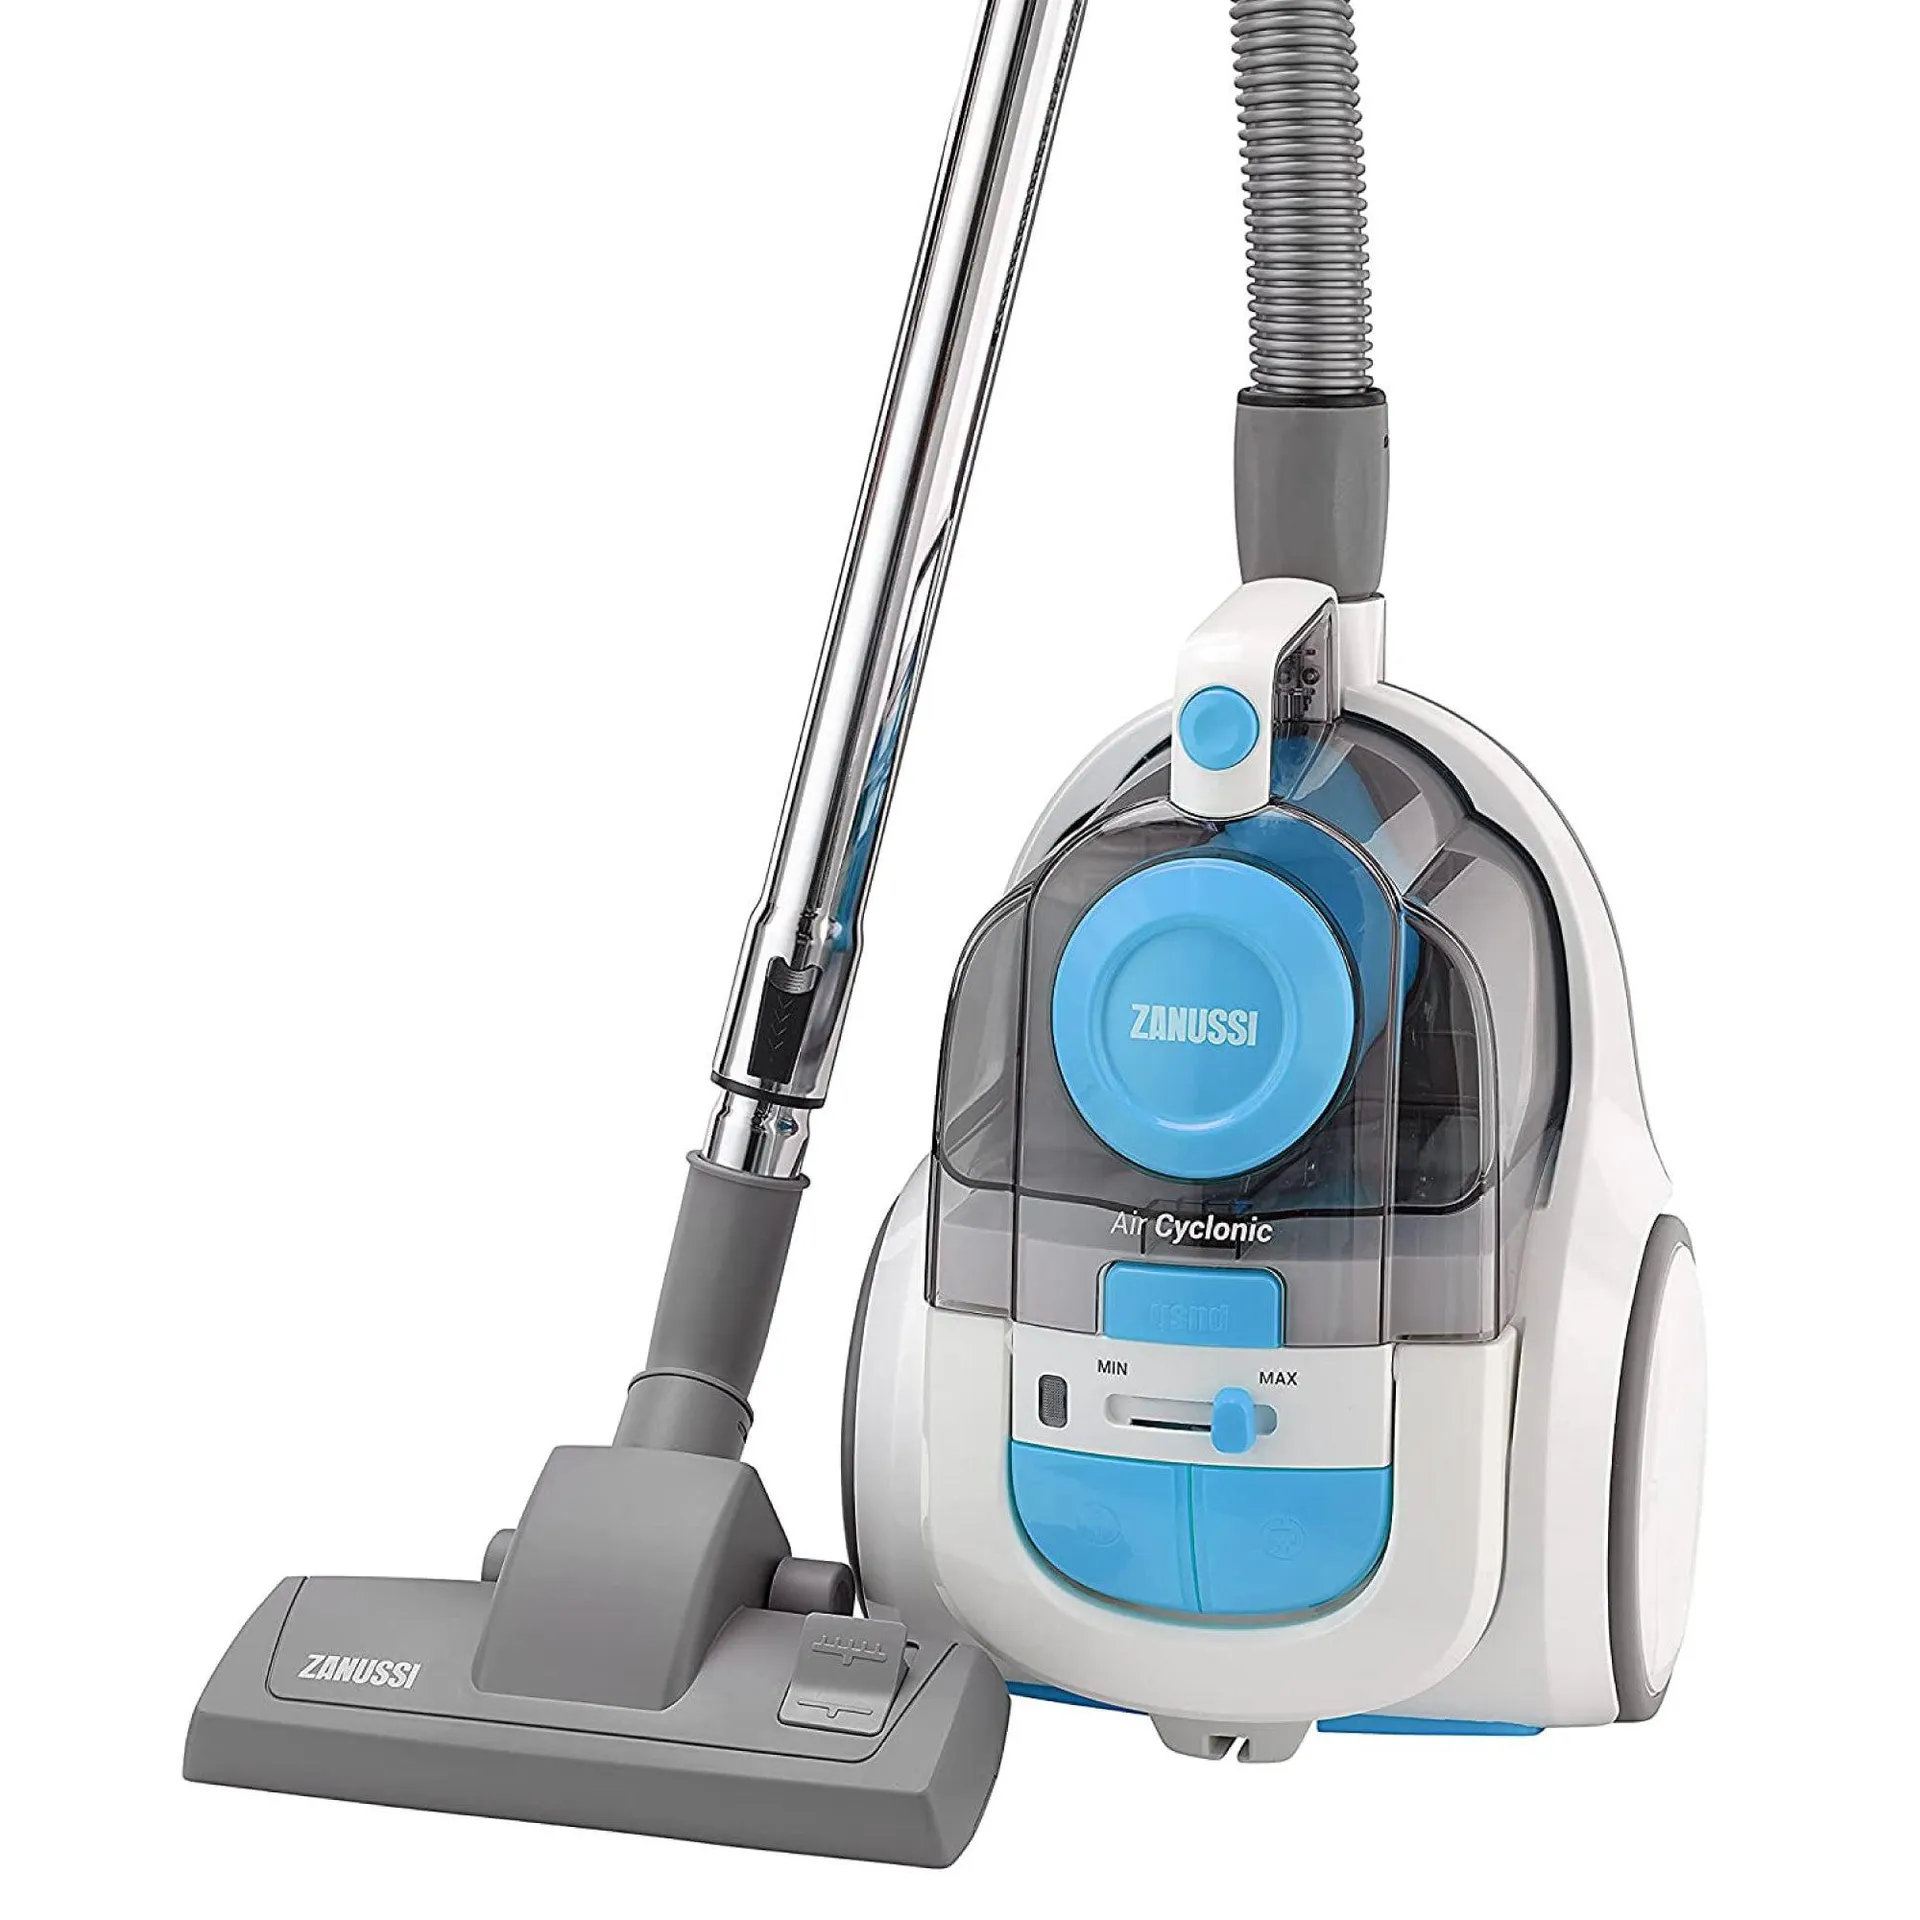 Zanussi Bagless Cyclonic Cylinder Vacuum Cleaner with Pet Hair Tool 600w - Blue White ZAN8620PT